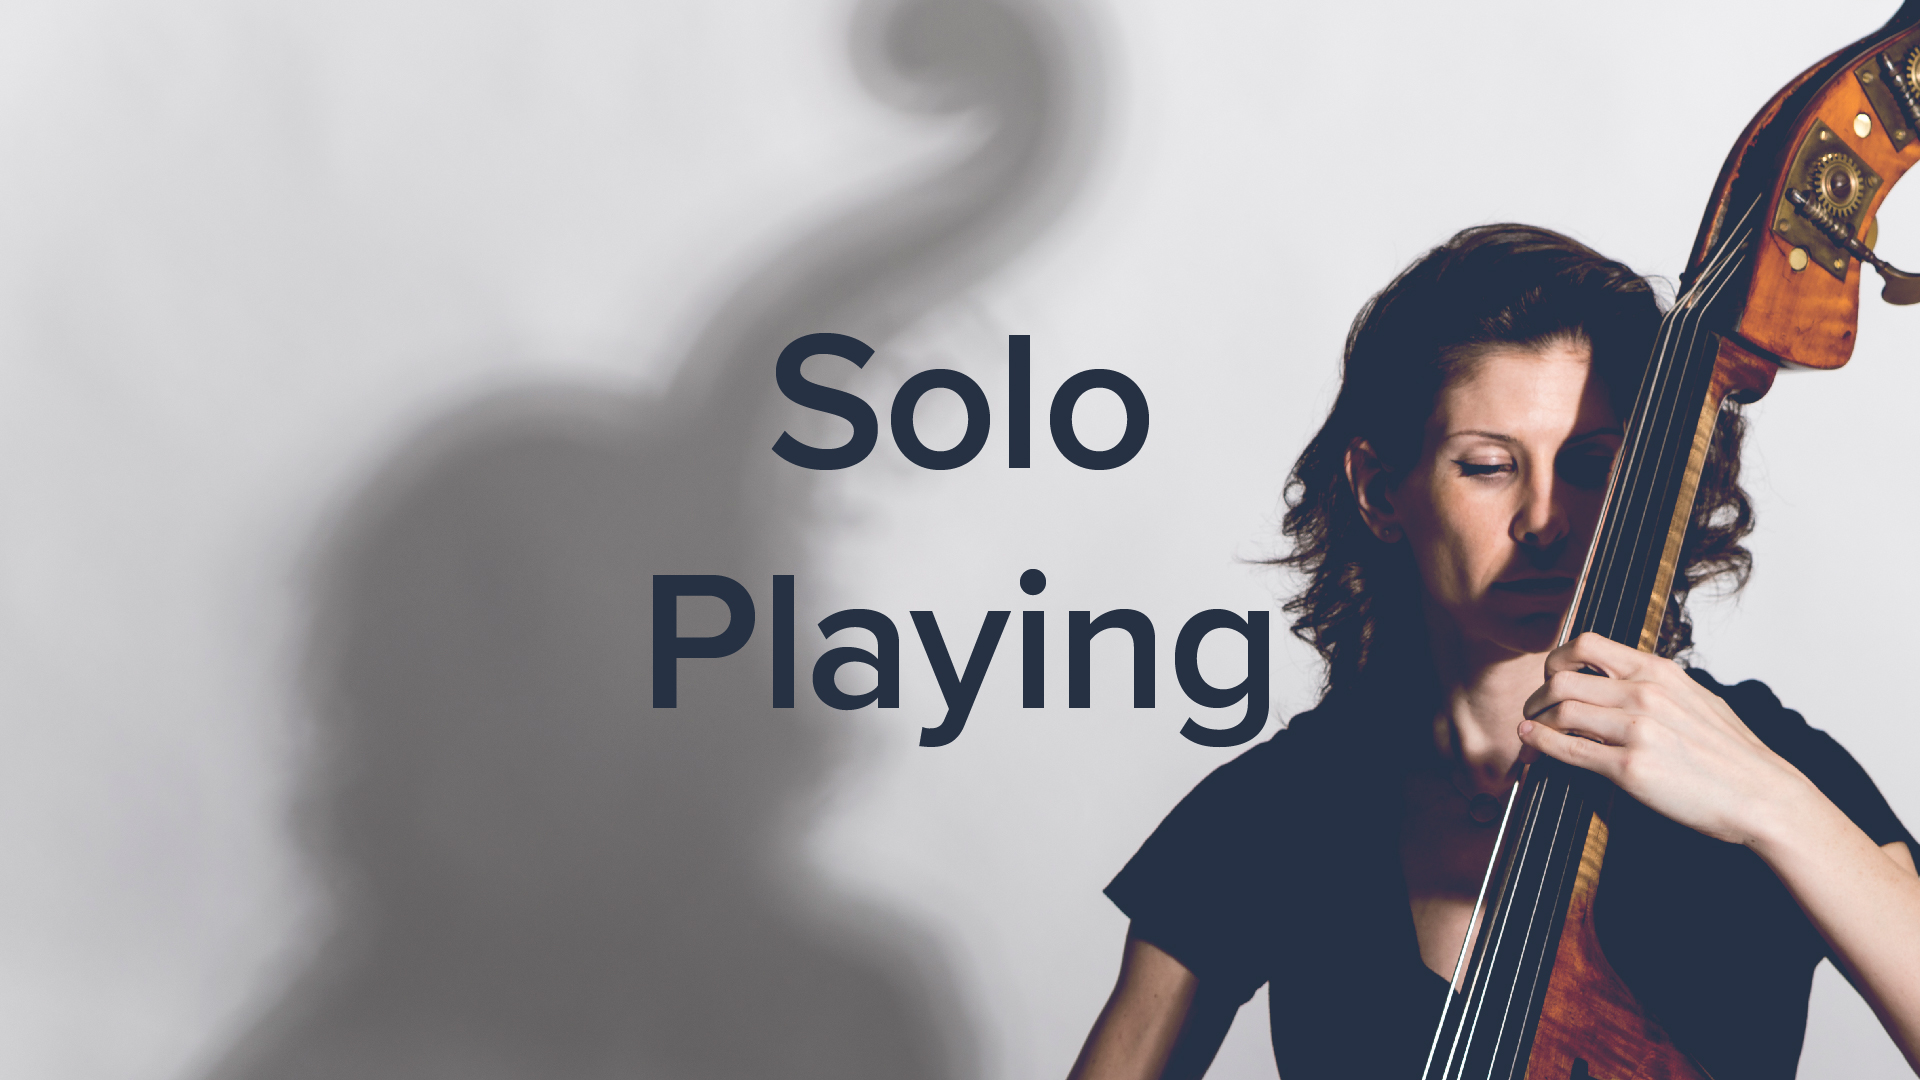 Concepts of Solo Playing